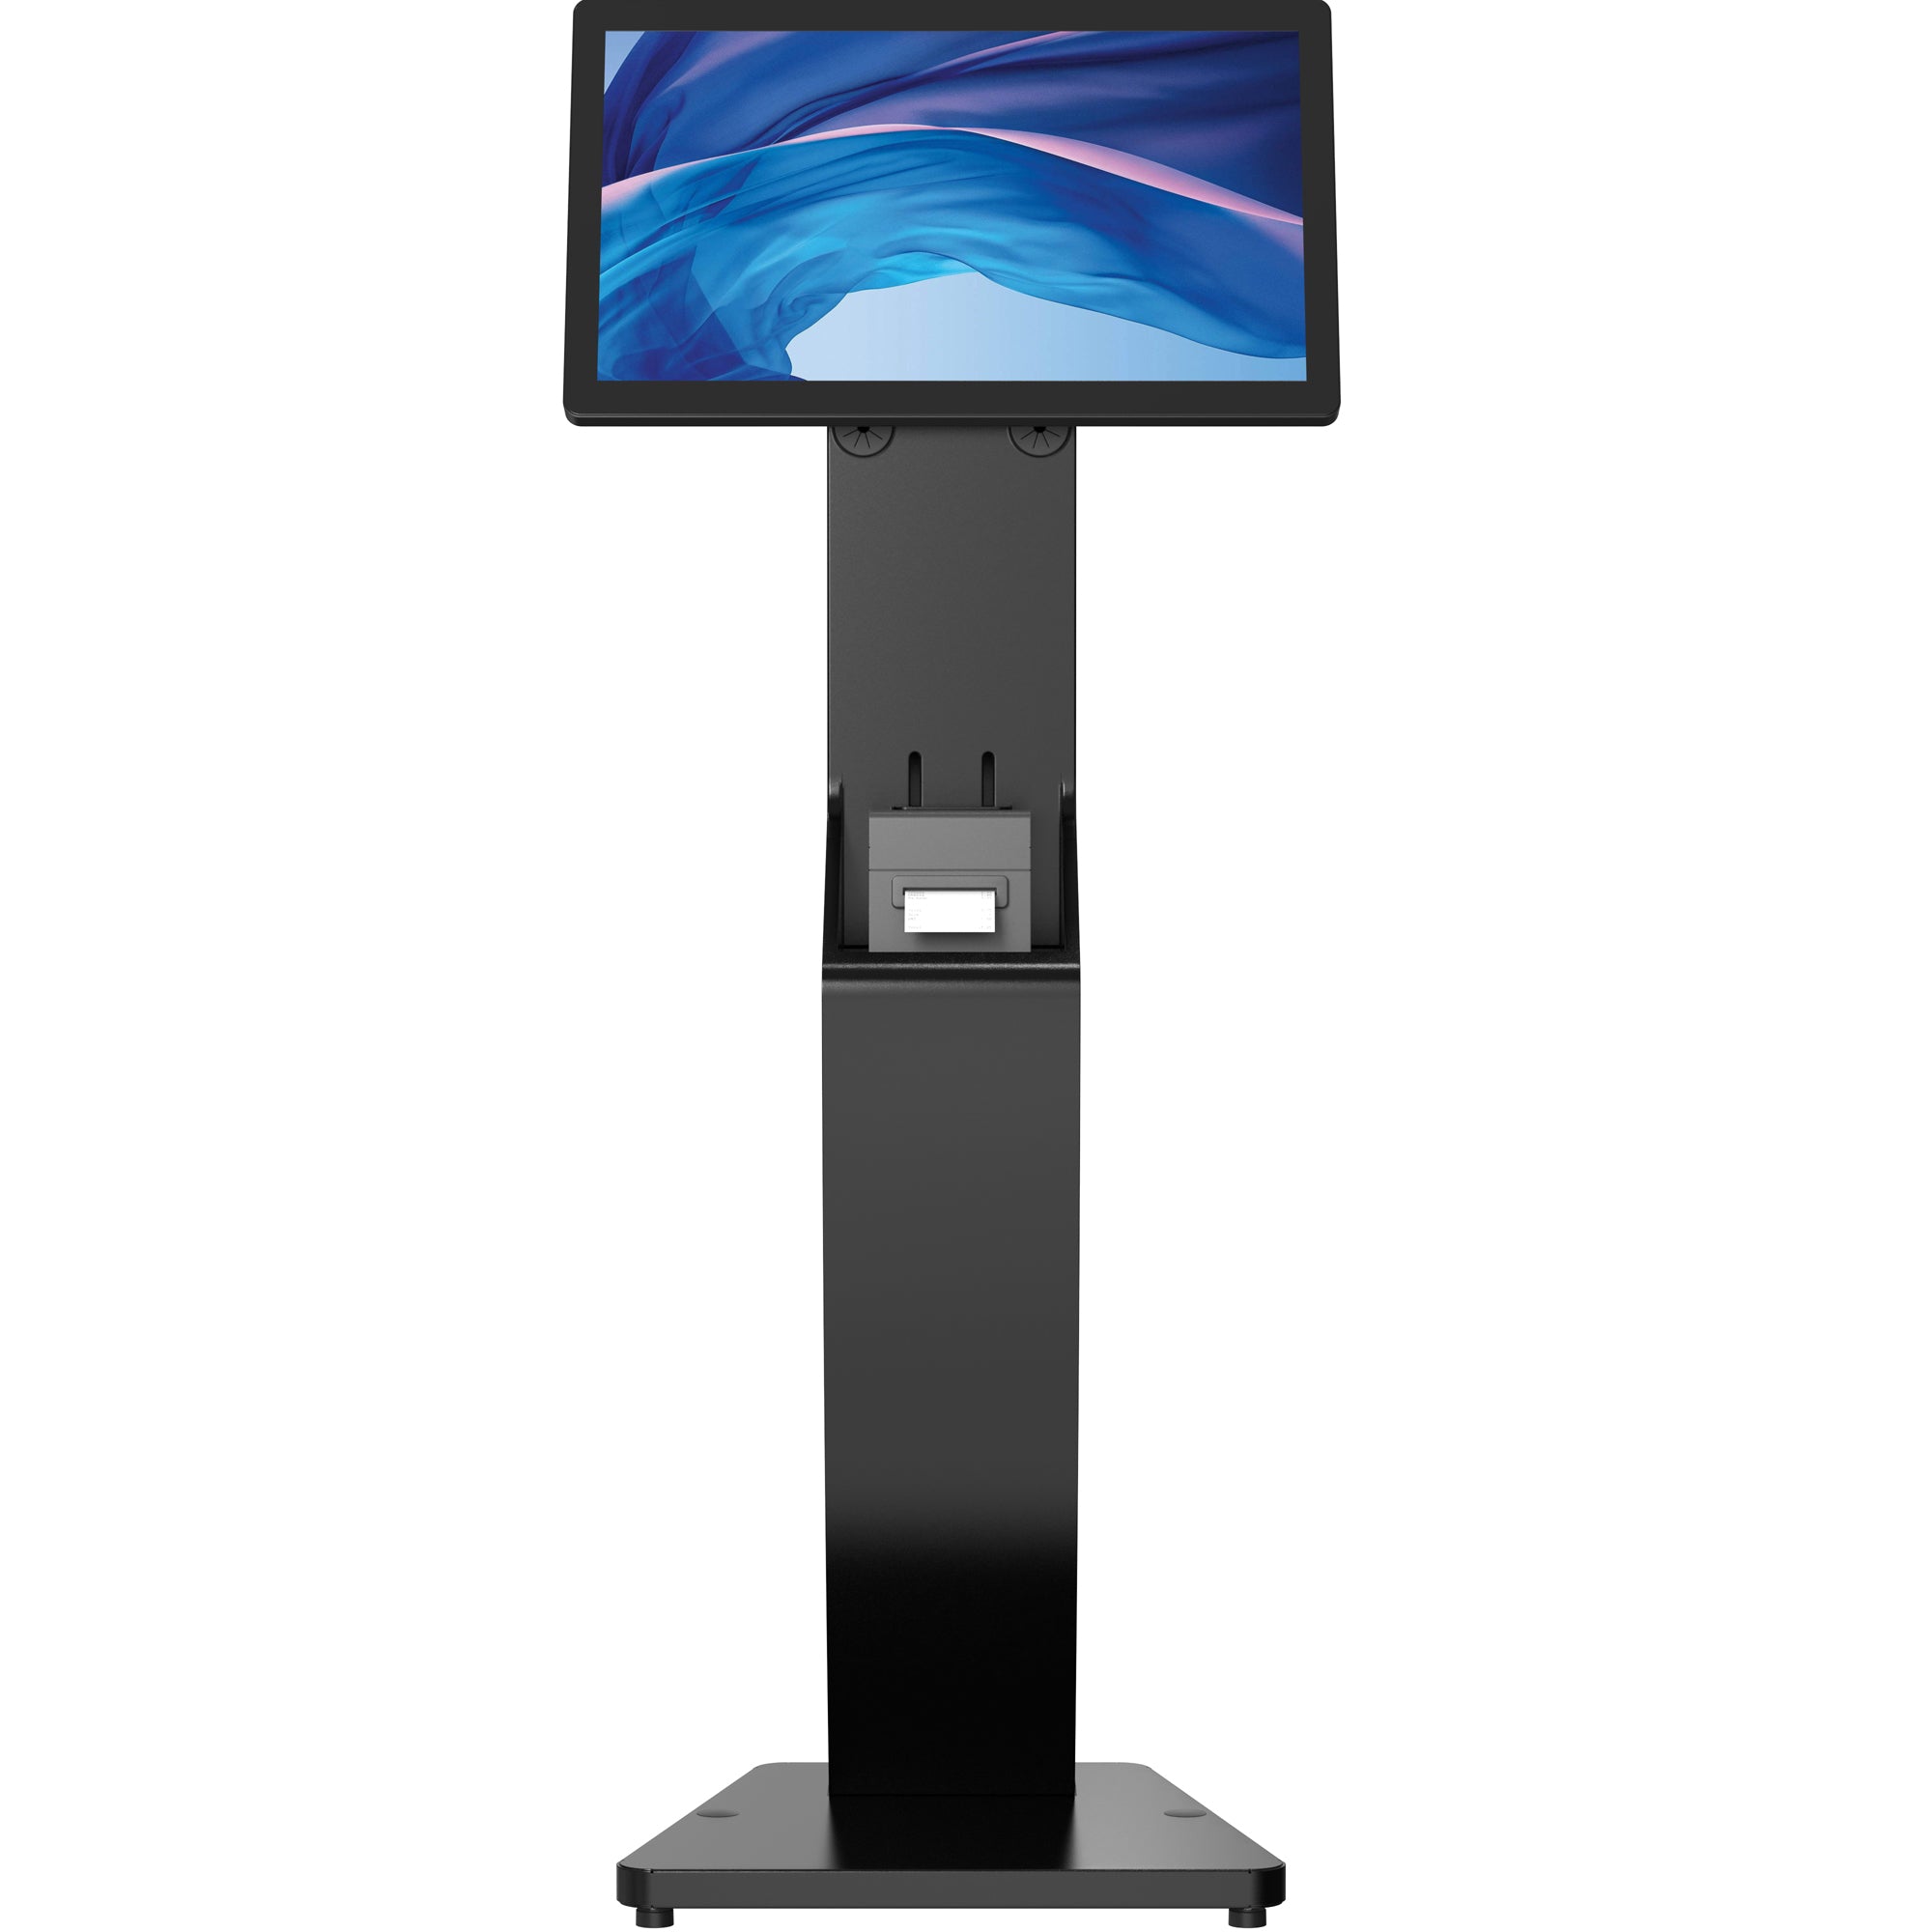 Sleek Floor Stand with Printer Slot for Touchscreen Monitors and Other Displays